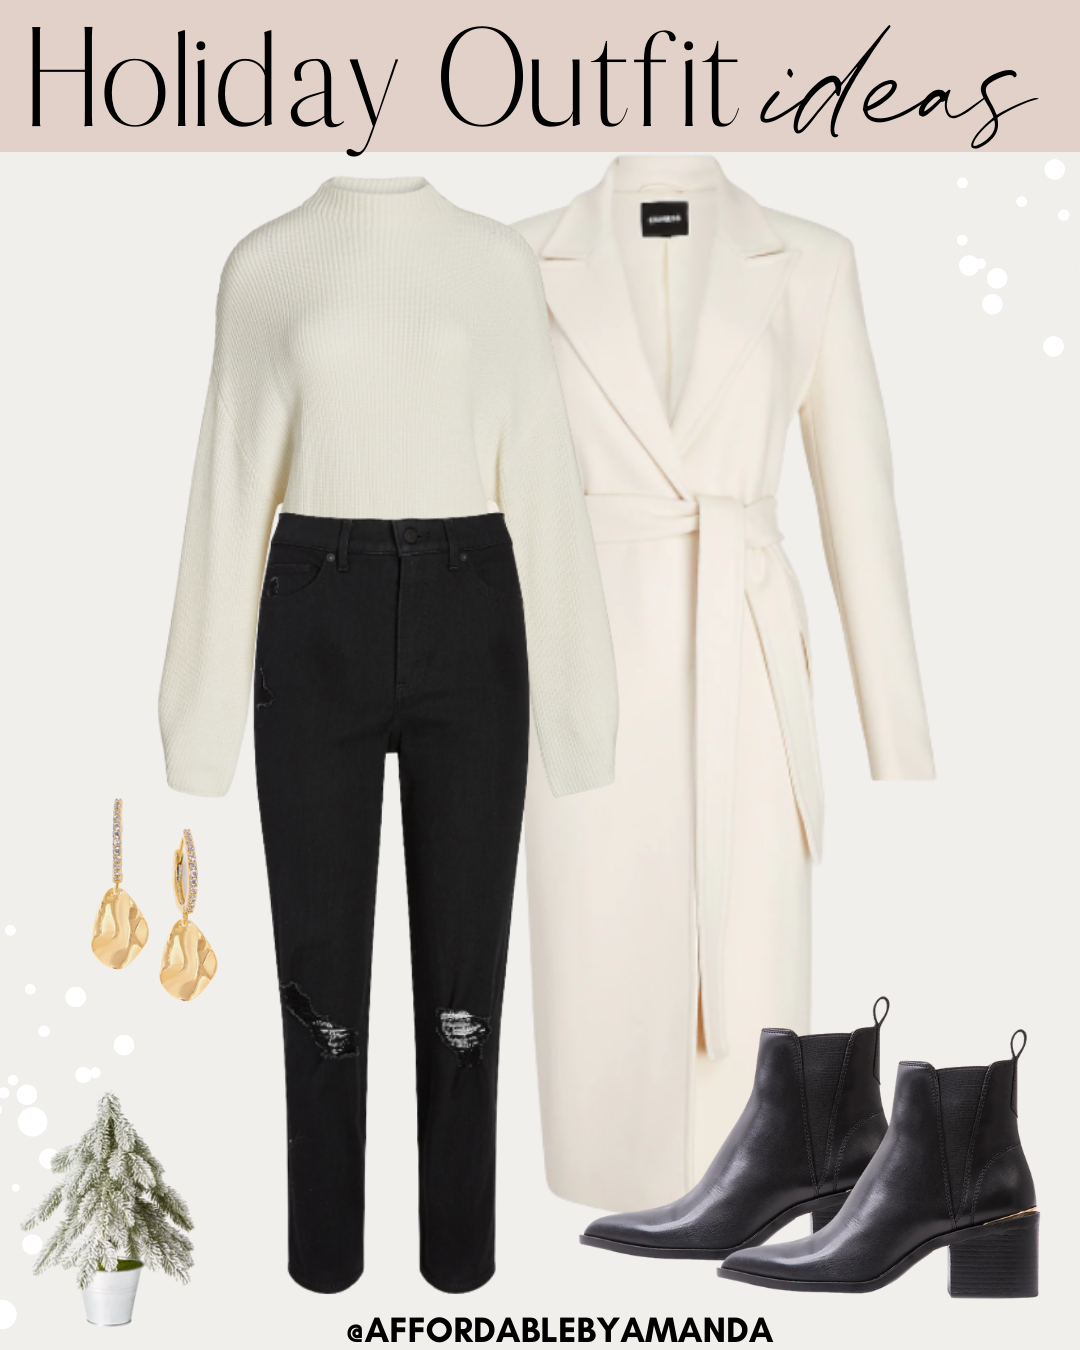 https://affordablebyamanda.com/wp-content/uploads/2020/12/Holiday-Outfit-Ideas-for-2020.png